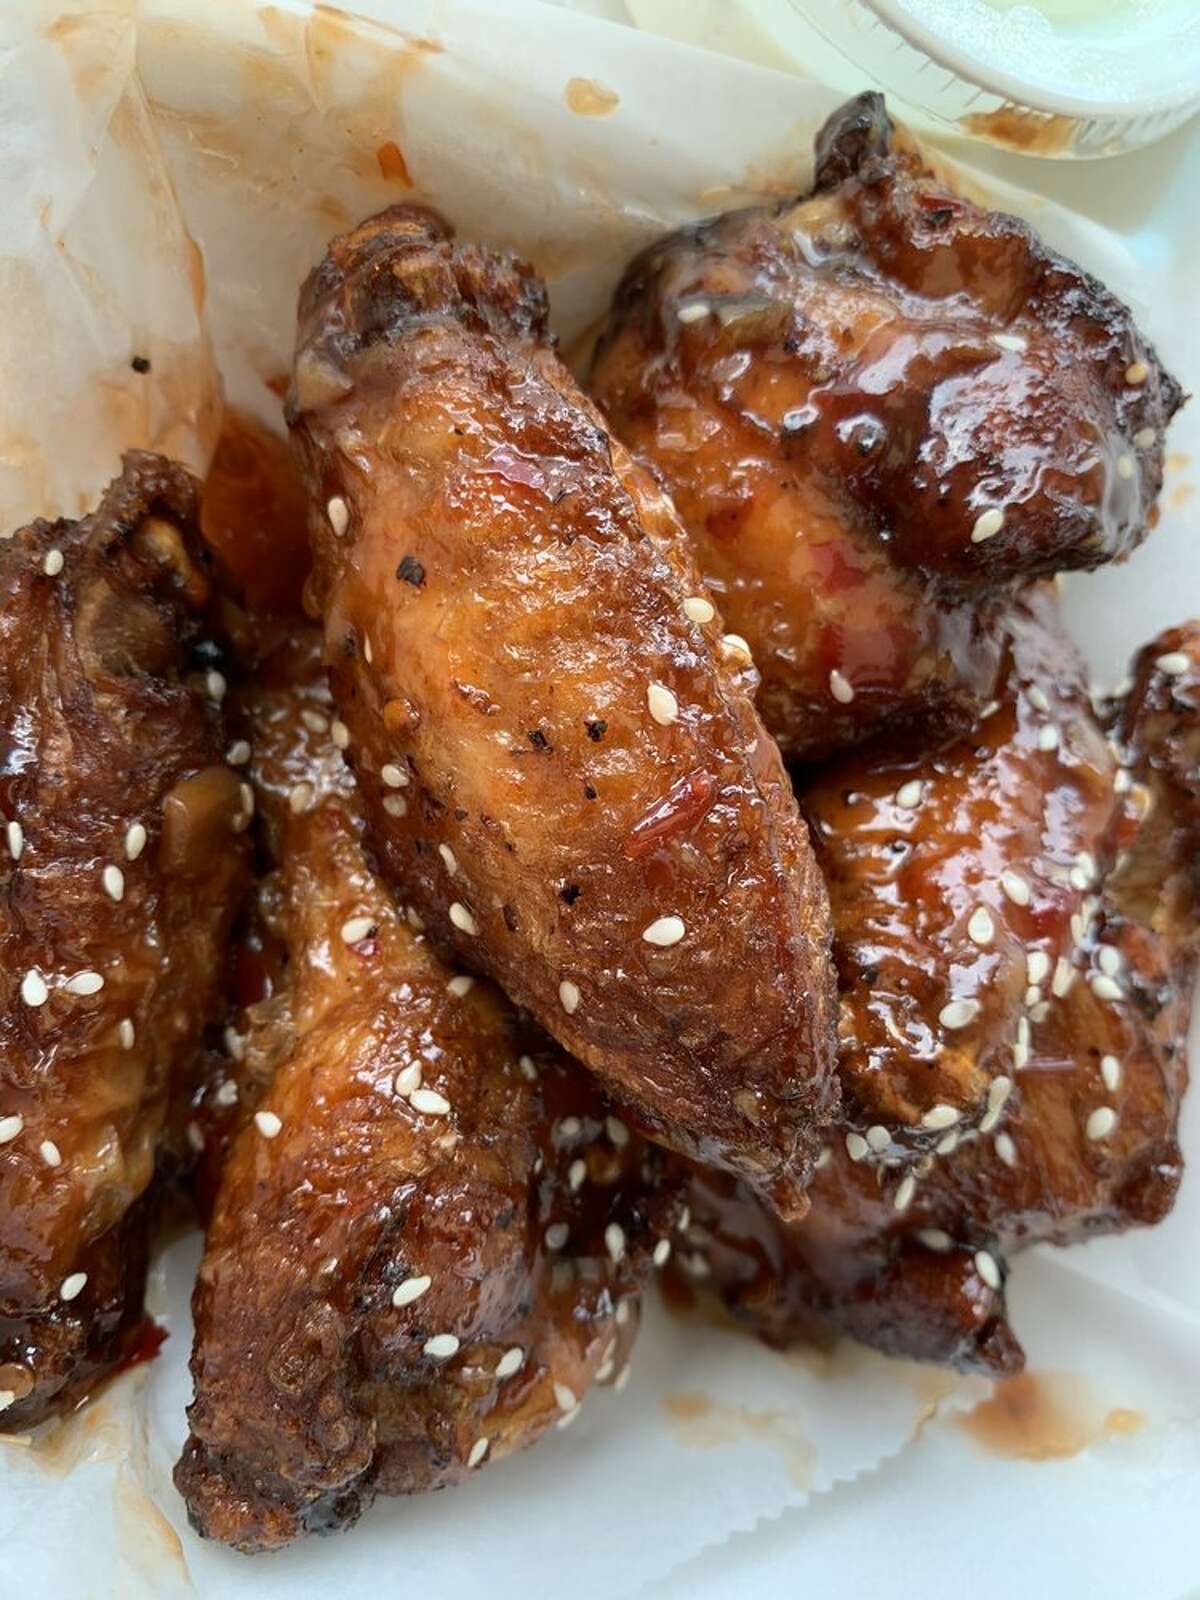 Thai chili wings from Gatlin's BBQ. 